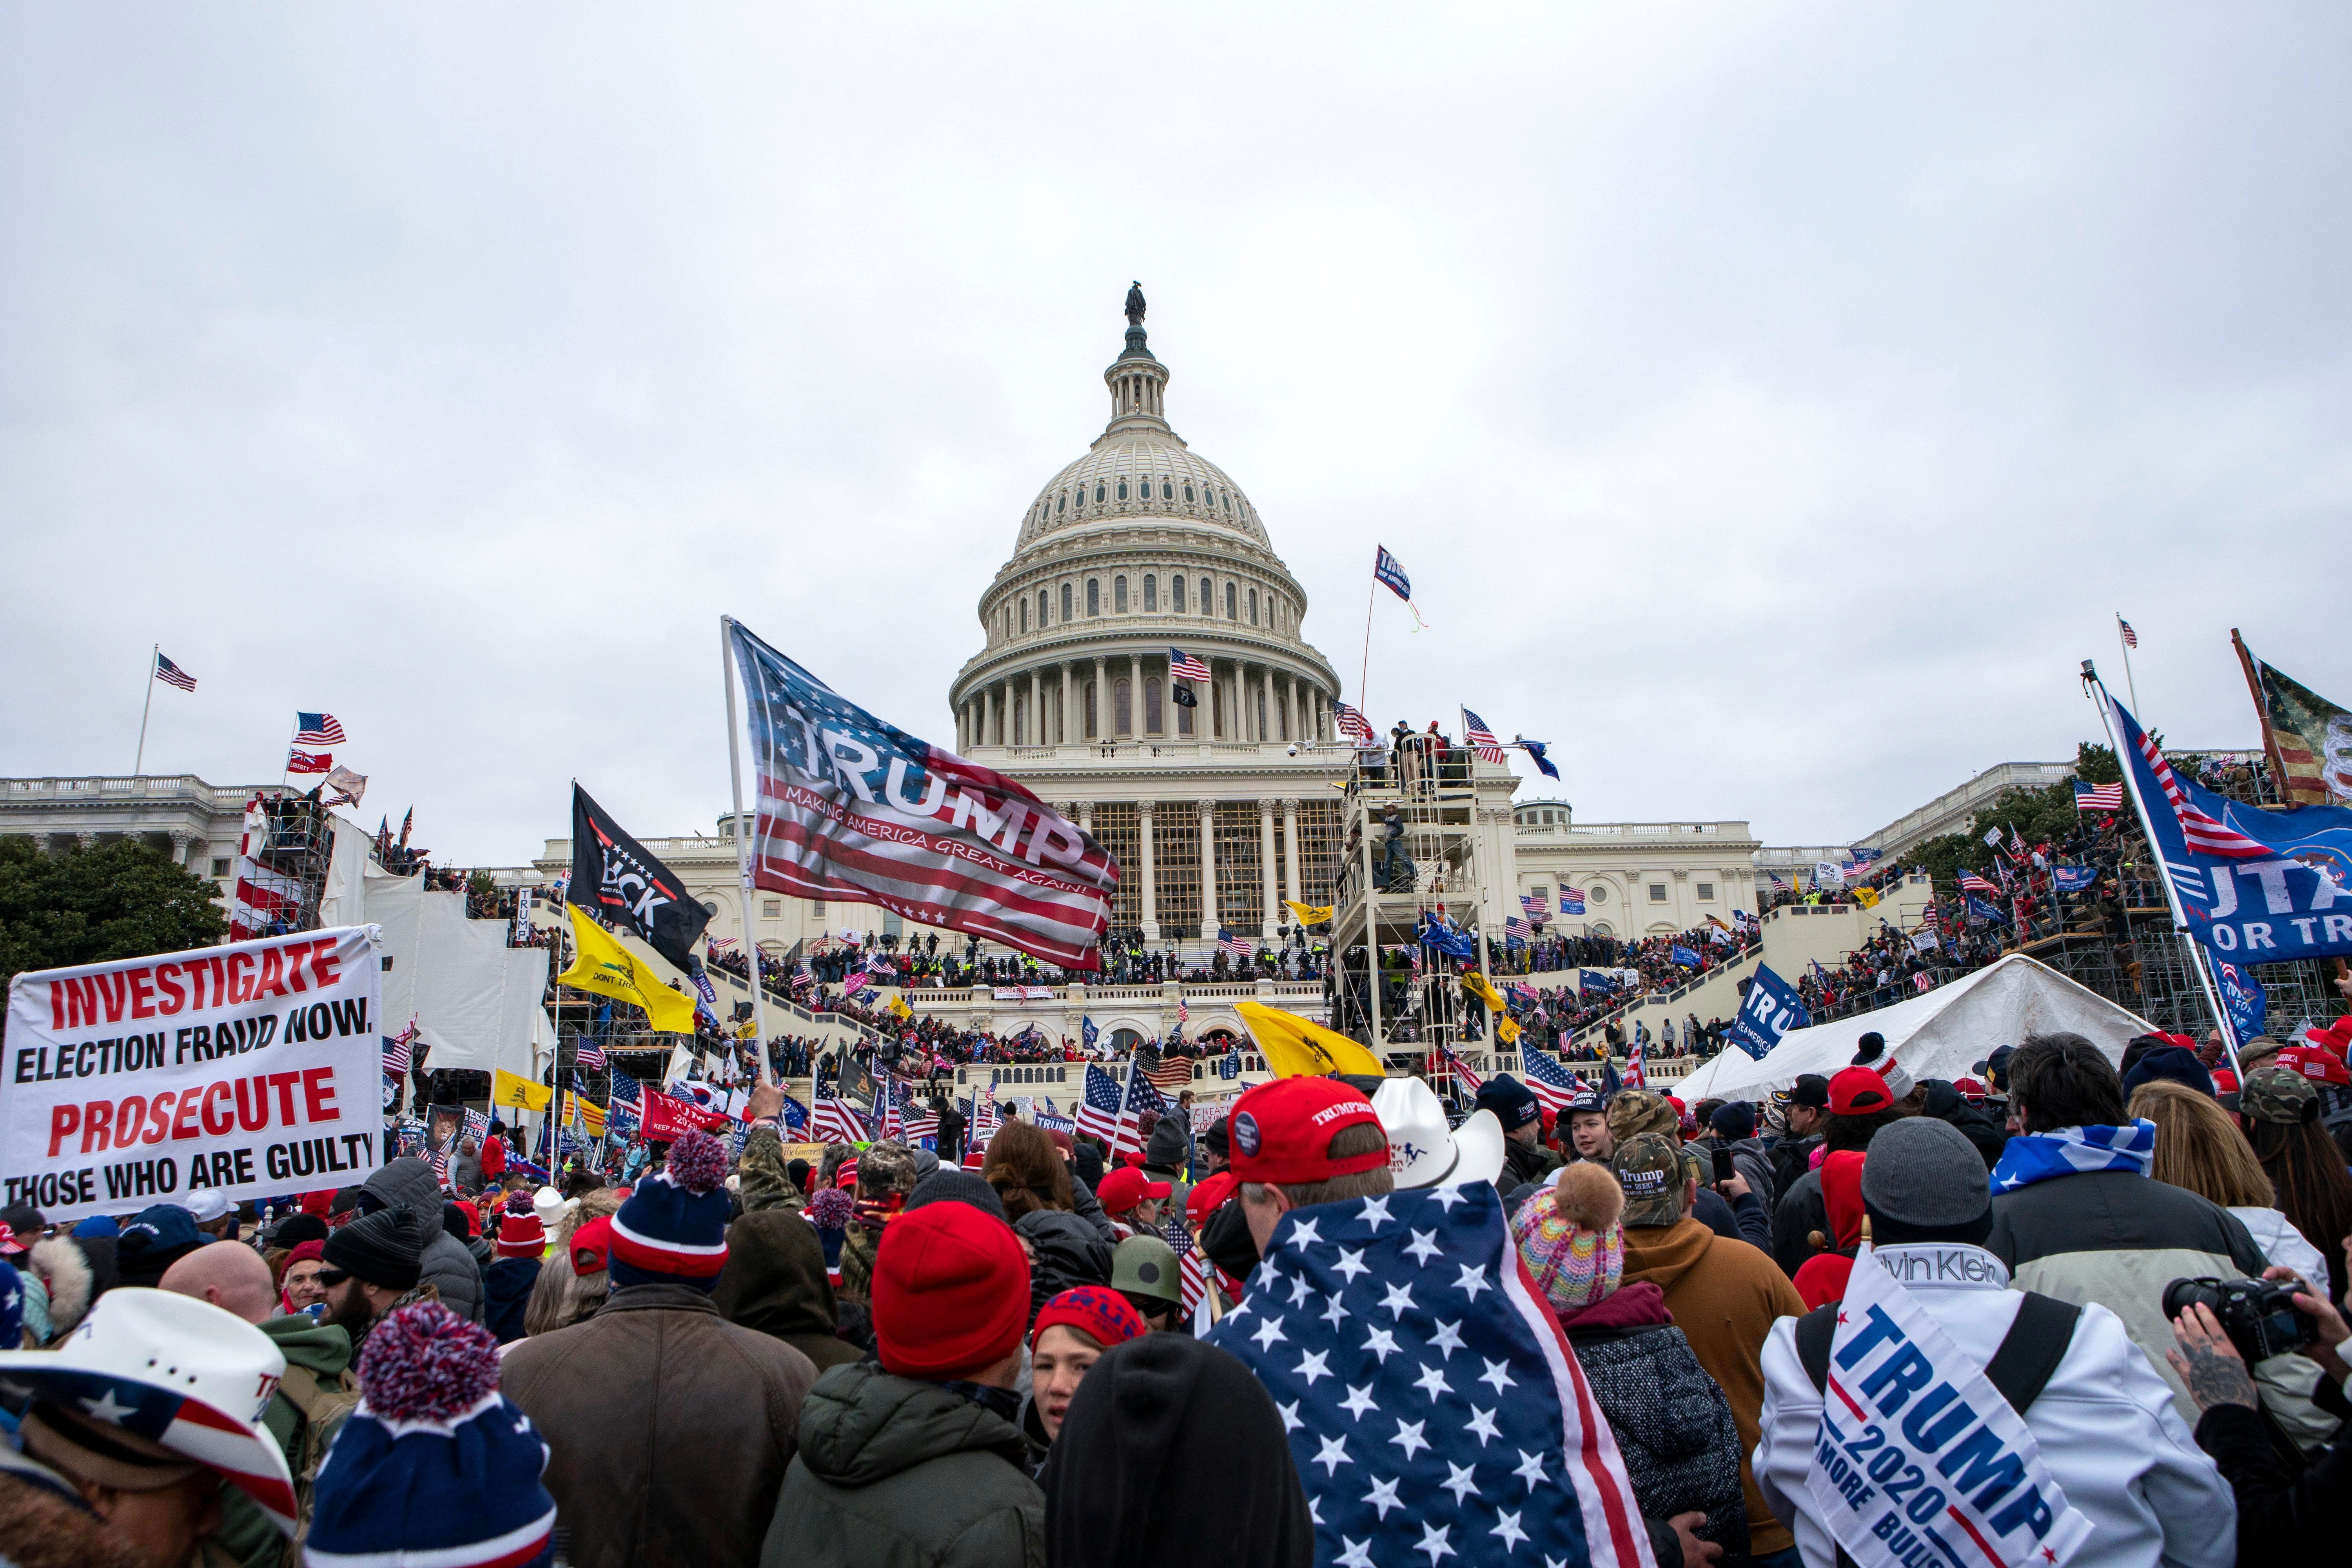 Rioters loyal to President Donald Trump gather on the West Front of the U.S. Capitol in Washington on January 6, 2021